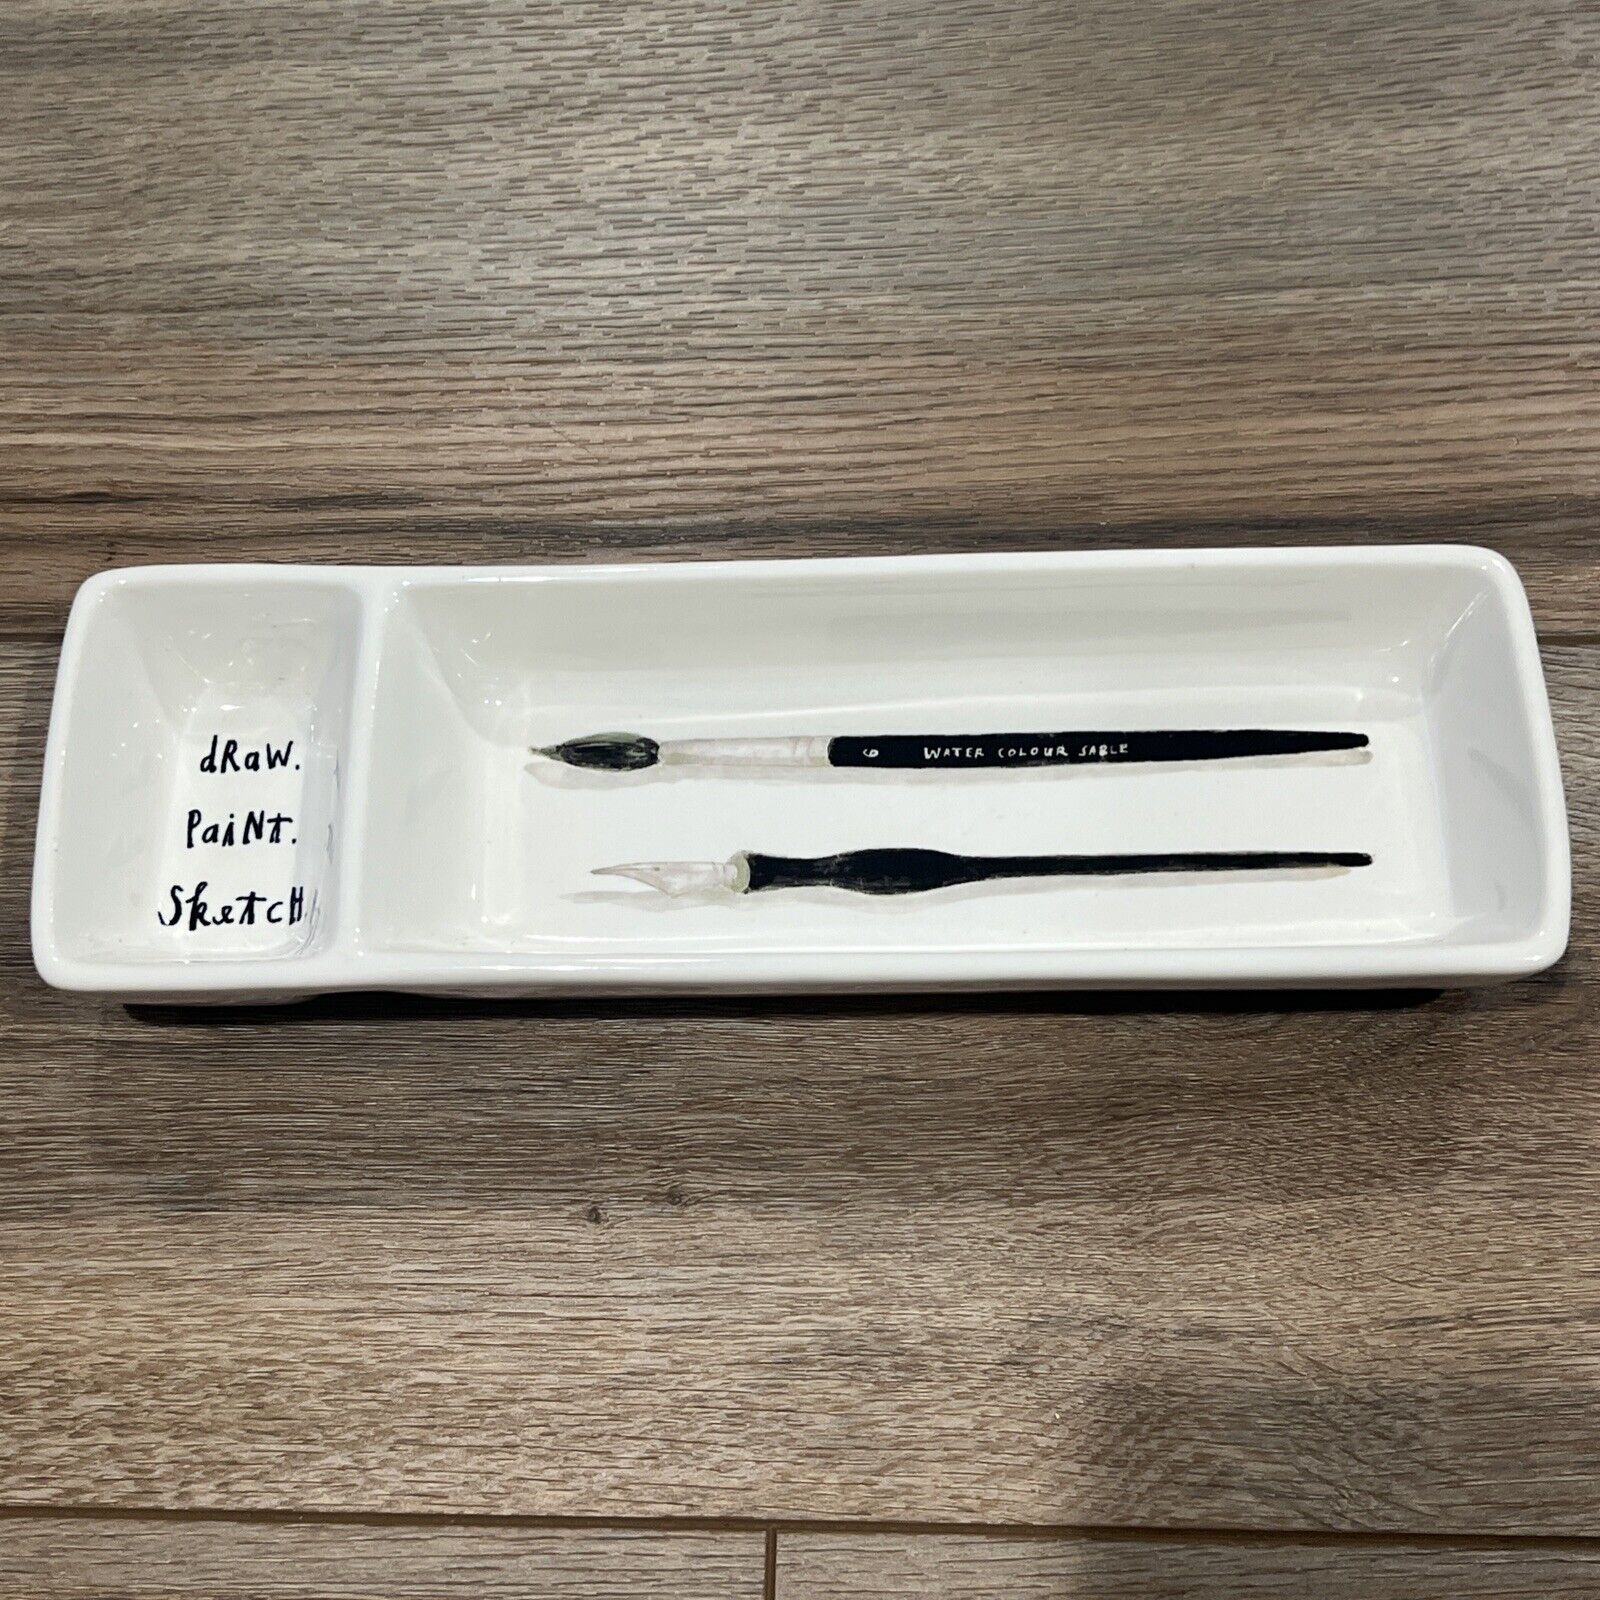 Rae Dunn Artisan Collection Draw Paint Sketch Pen Brush Divided Tray Artist